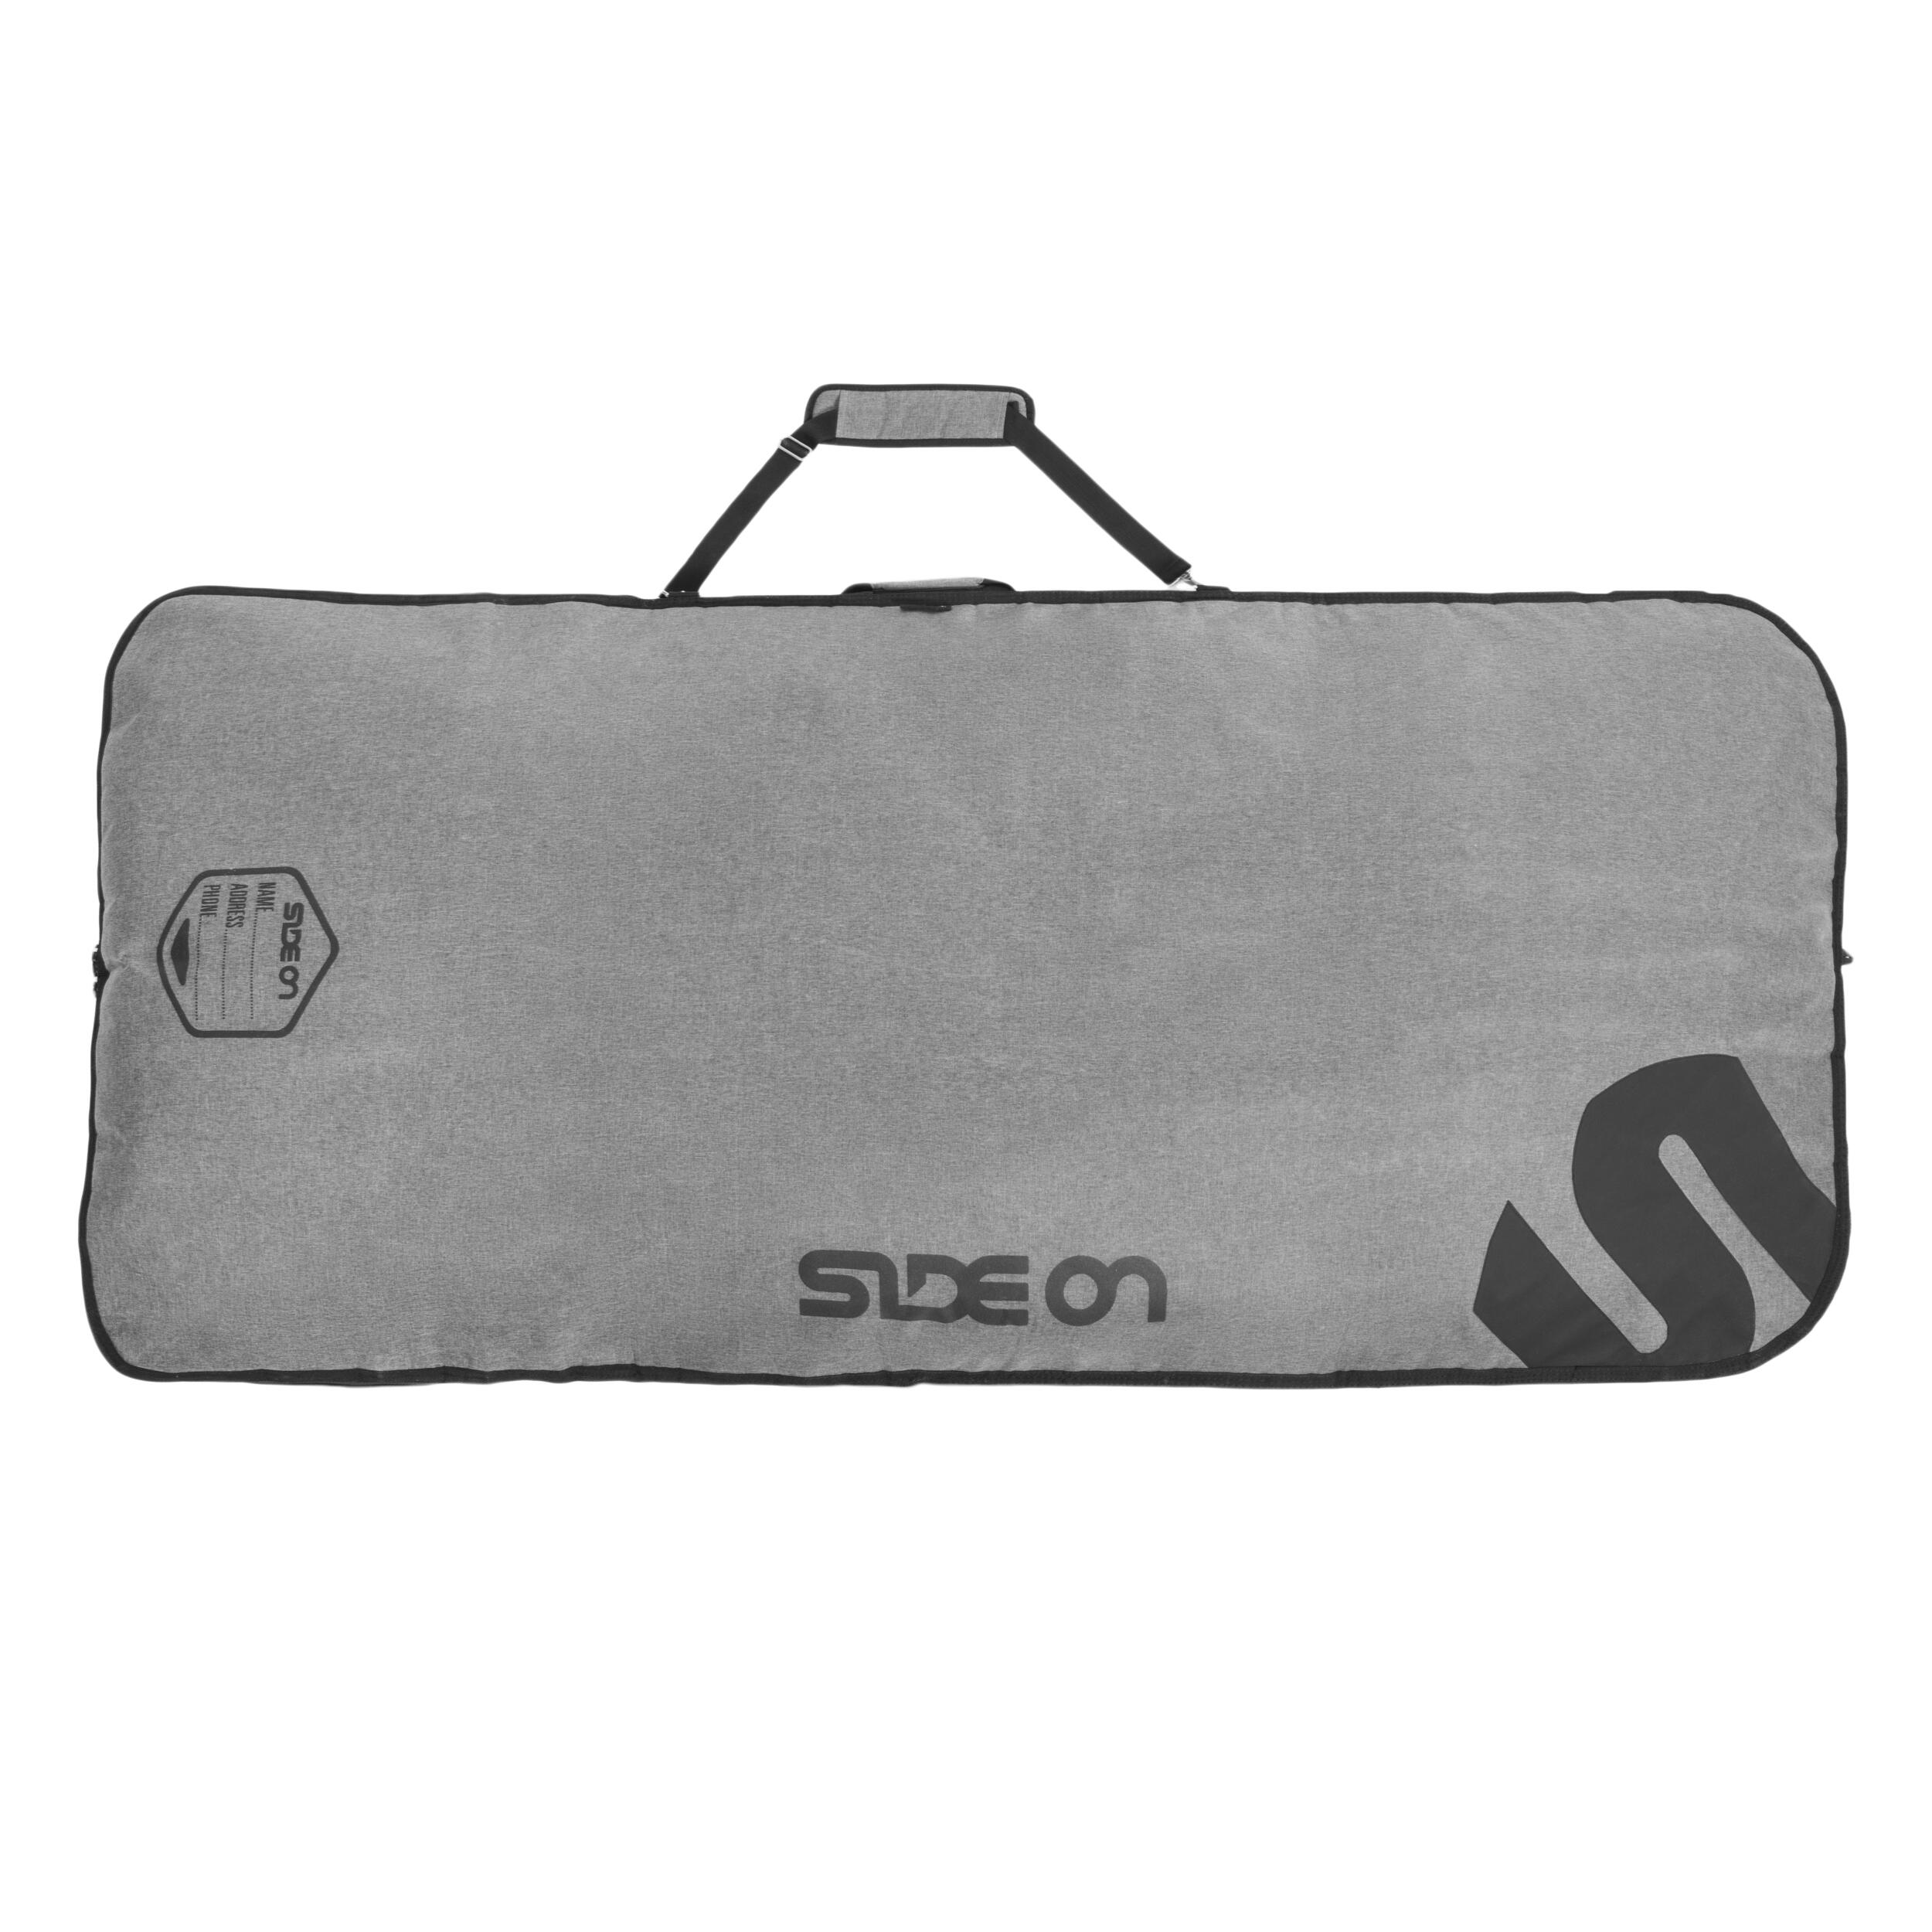 SIDE ON WINGFOIL BOARD PROTECTIVE BAG